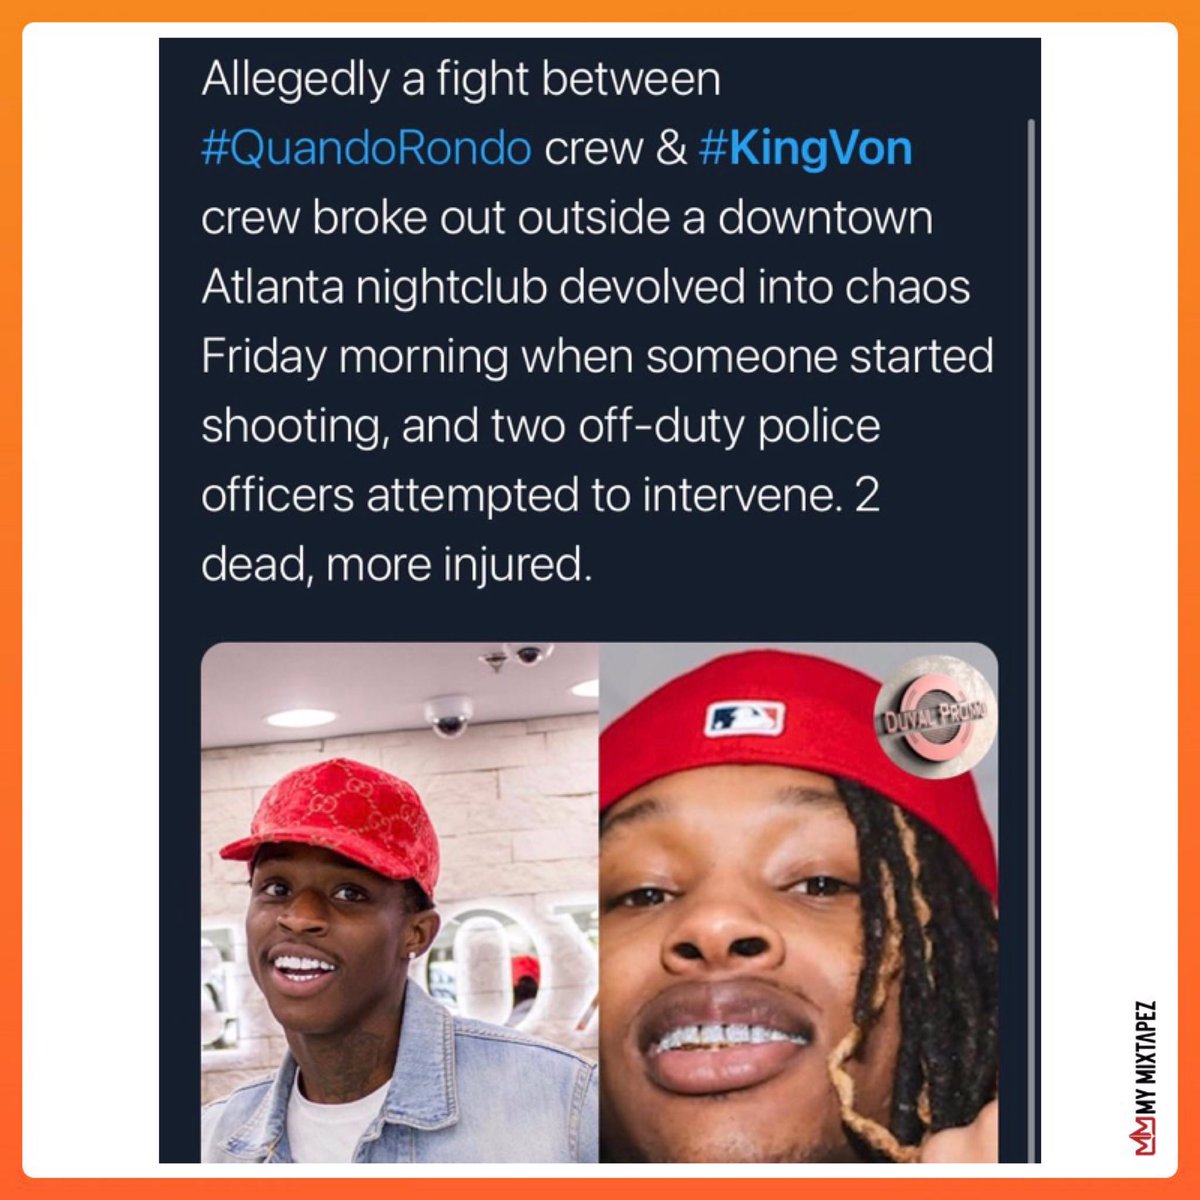 My Mixtapez King Von Has Reportedly Been Shot In A Shooting That Took Place In Atlanta Wishing Von A Speedy Recovery If True Stay Posted For Updates T Co Zy69dqi46t